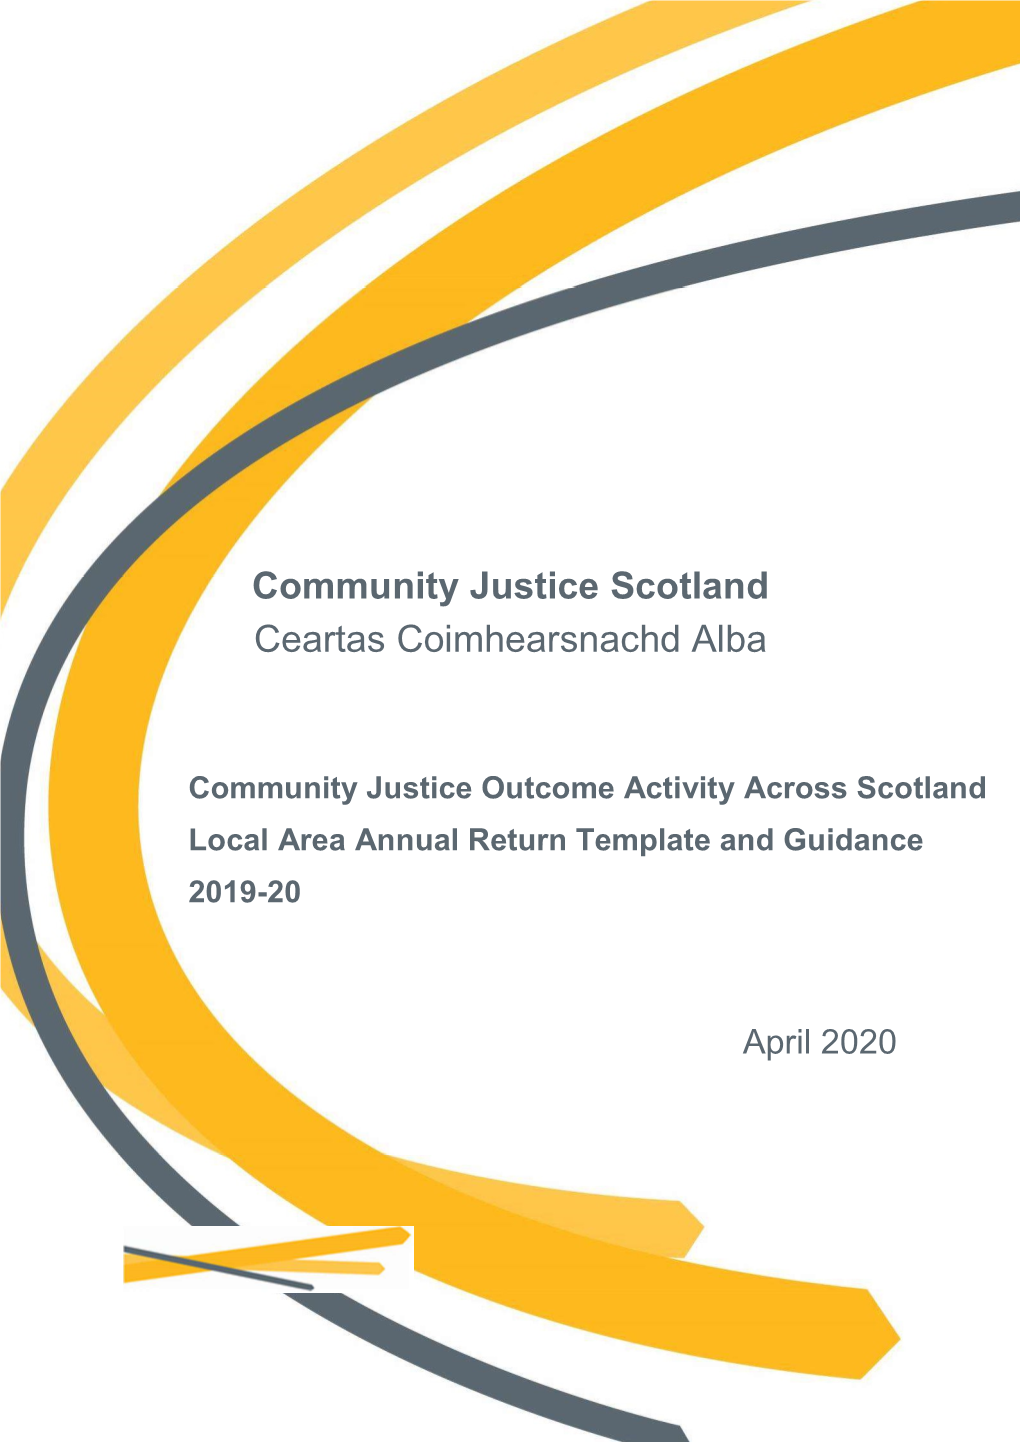 Community Justice Outcome Activity Across Scotland Local Area Annual Return Template and Guidance 2019-20